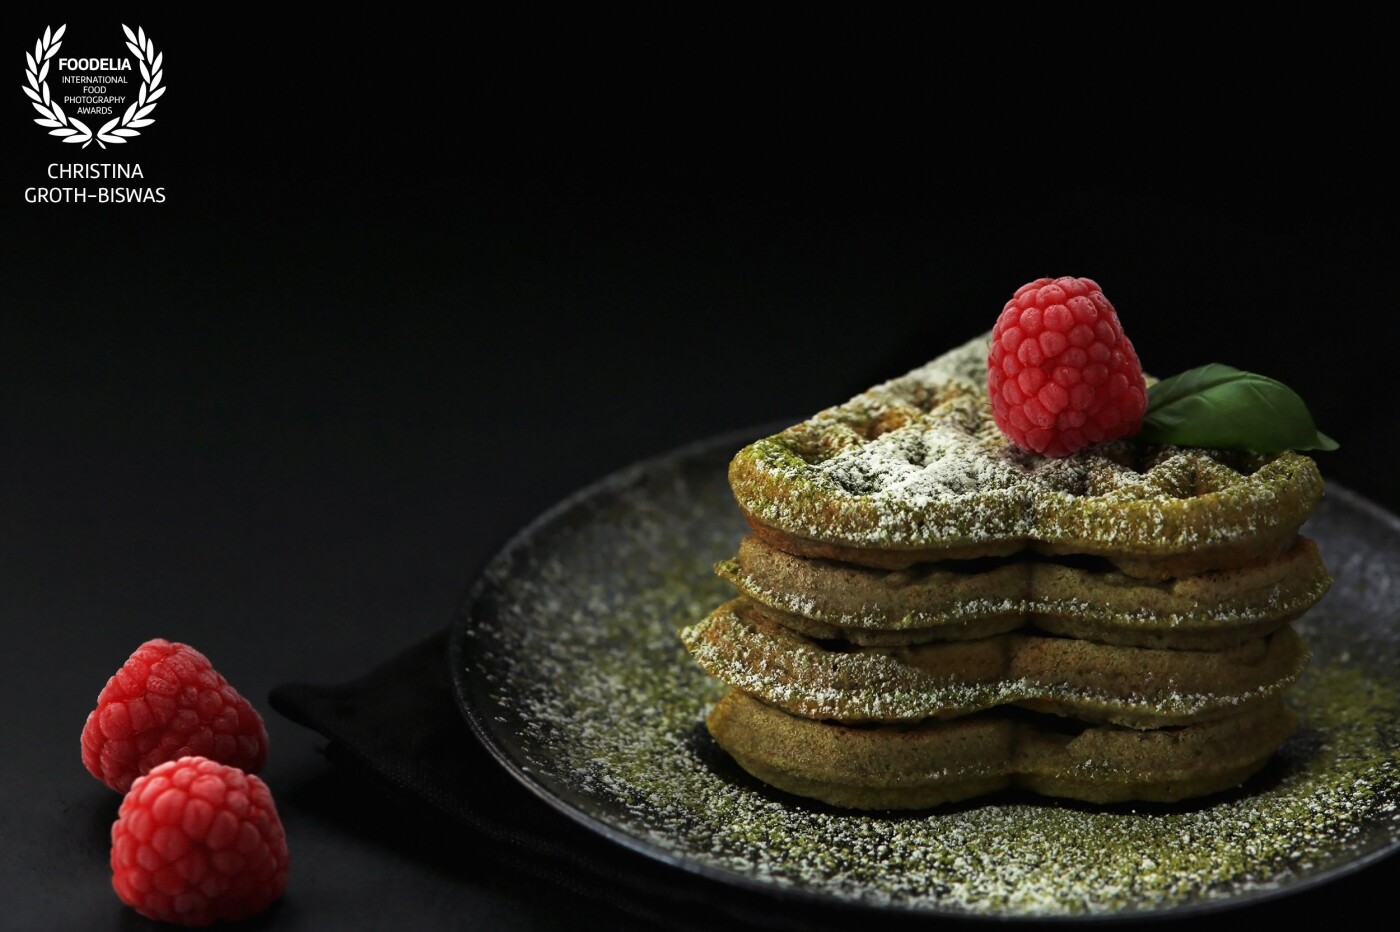 Matcha tea waffles. The subtle bitterness of the matcha tea powder contrasts the sweetness of the waffles and fruits which makes it a surprisingly light and elegant dessert.<br />
